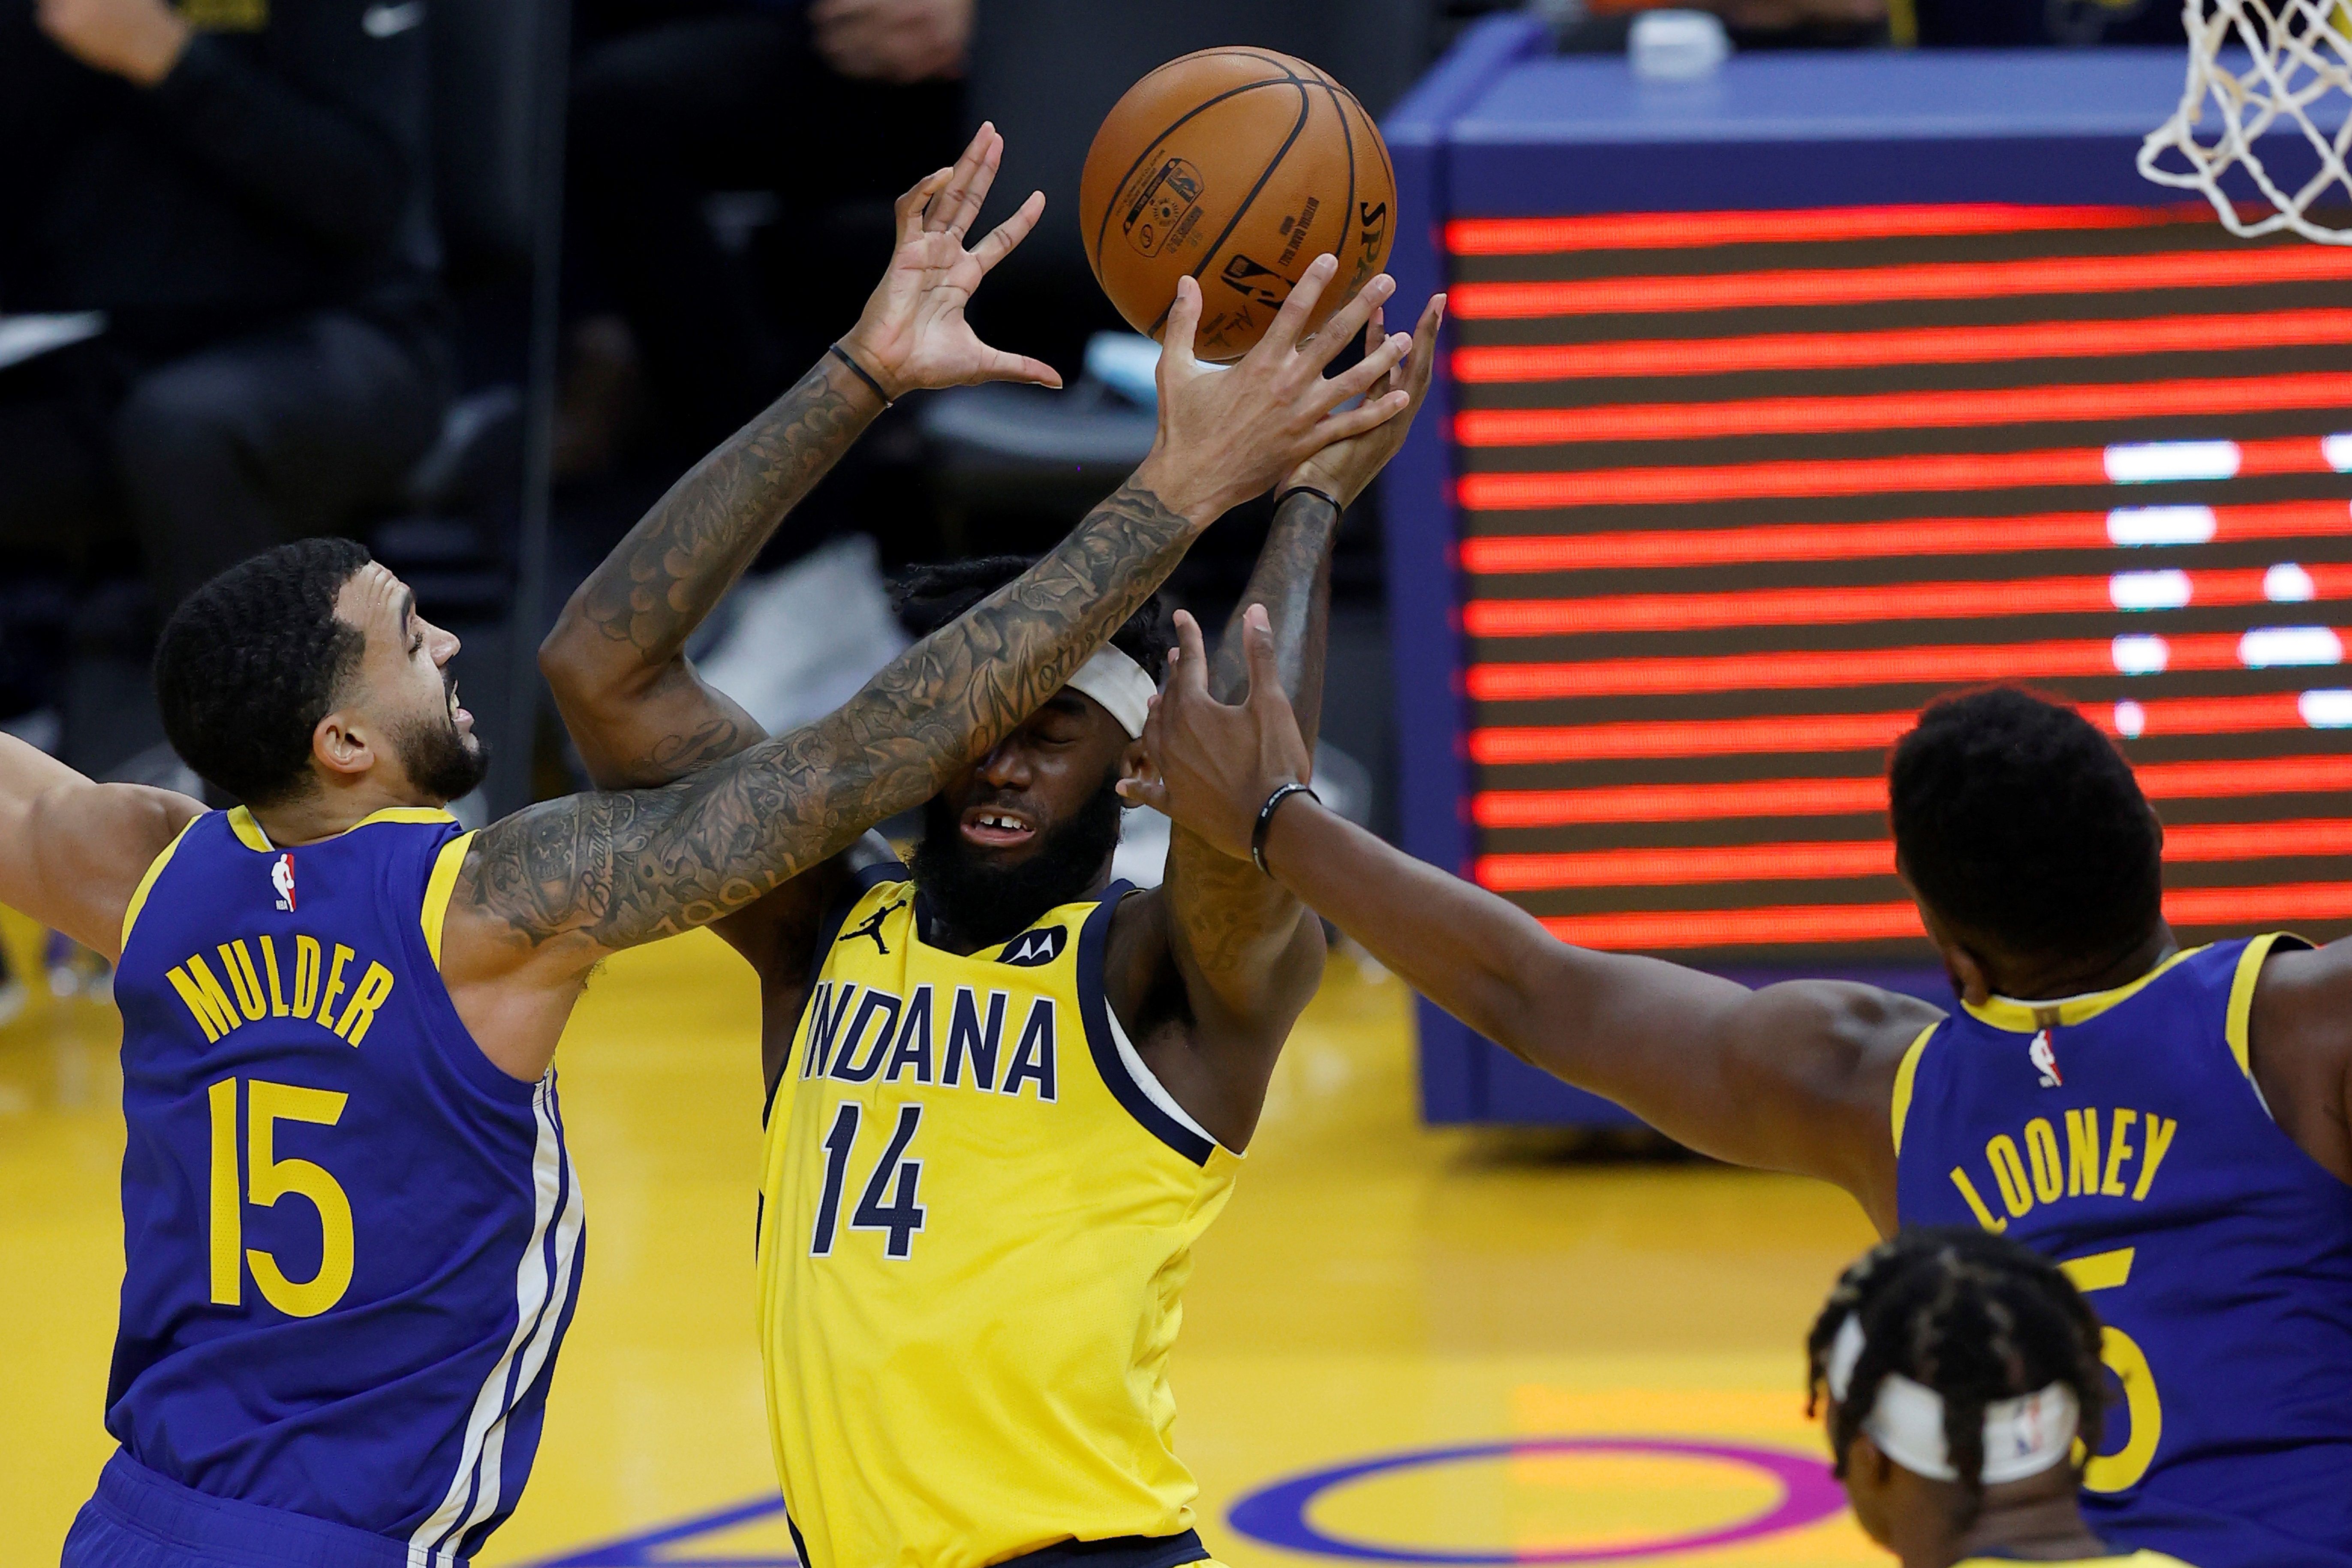 San Francisco (United States), 13/01/2021.- Indiana Pacers forward JaKarr Sampson (C) in action against Golden State Warriors guard Mychal Mulder (L) and EFE/EPA/JOHN G. MABANGLO SHUTTERSTOCK OUT 